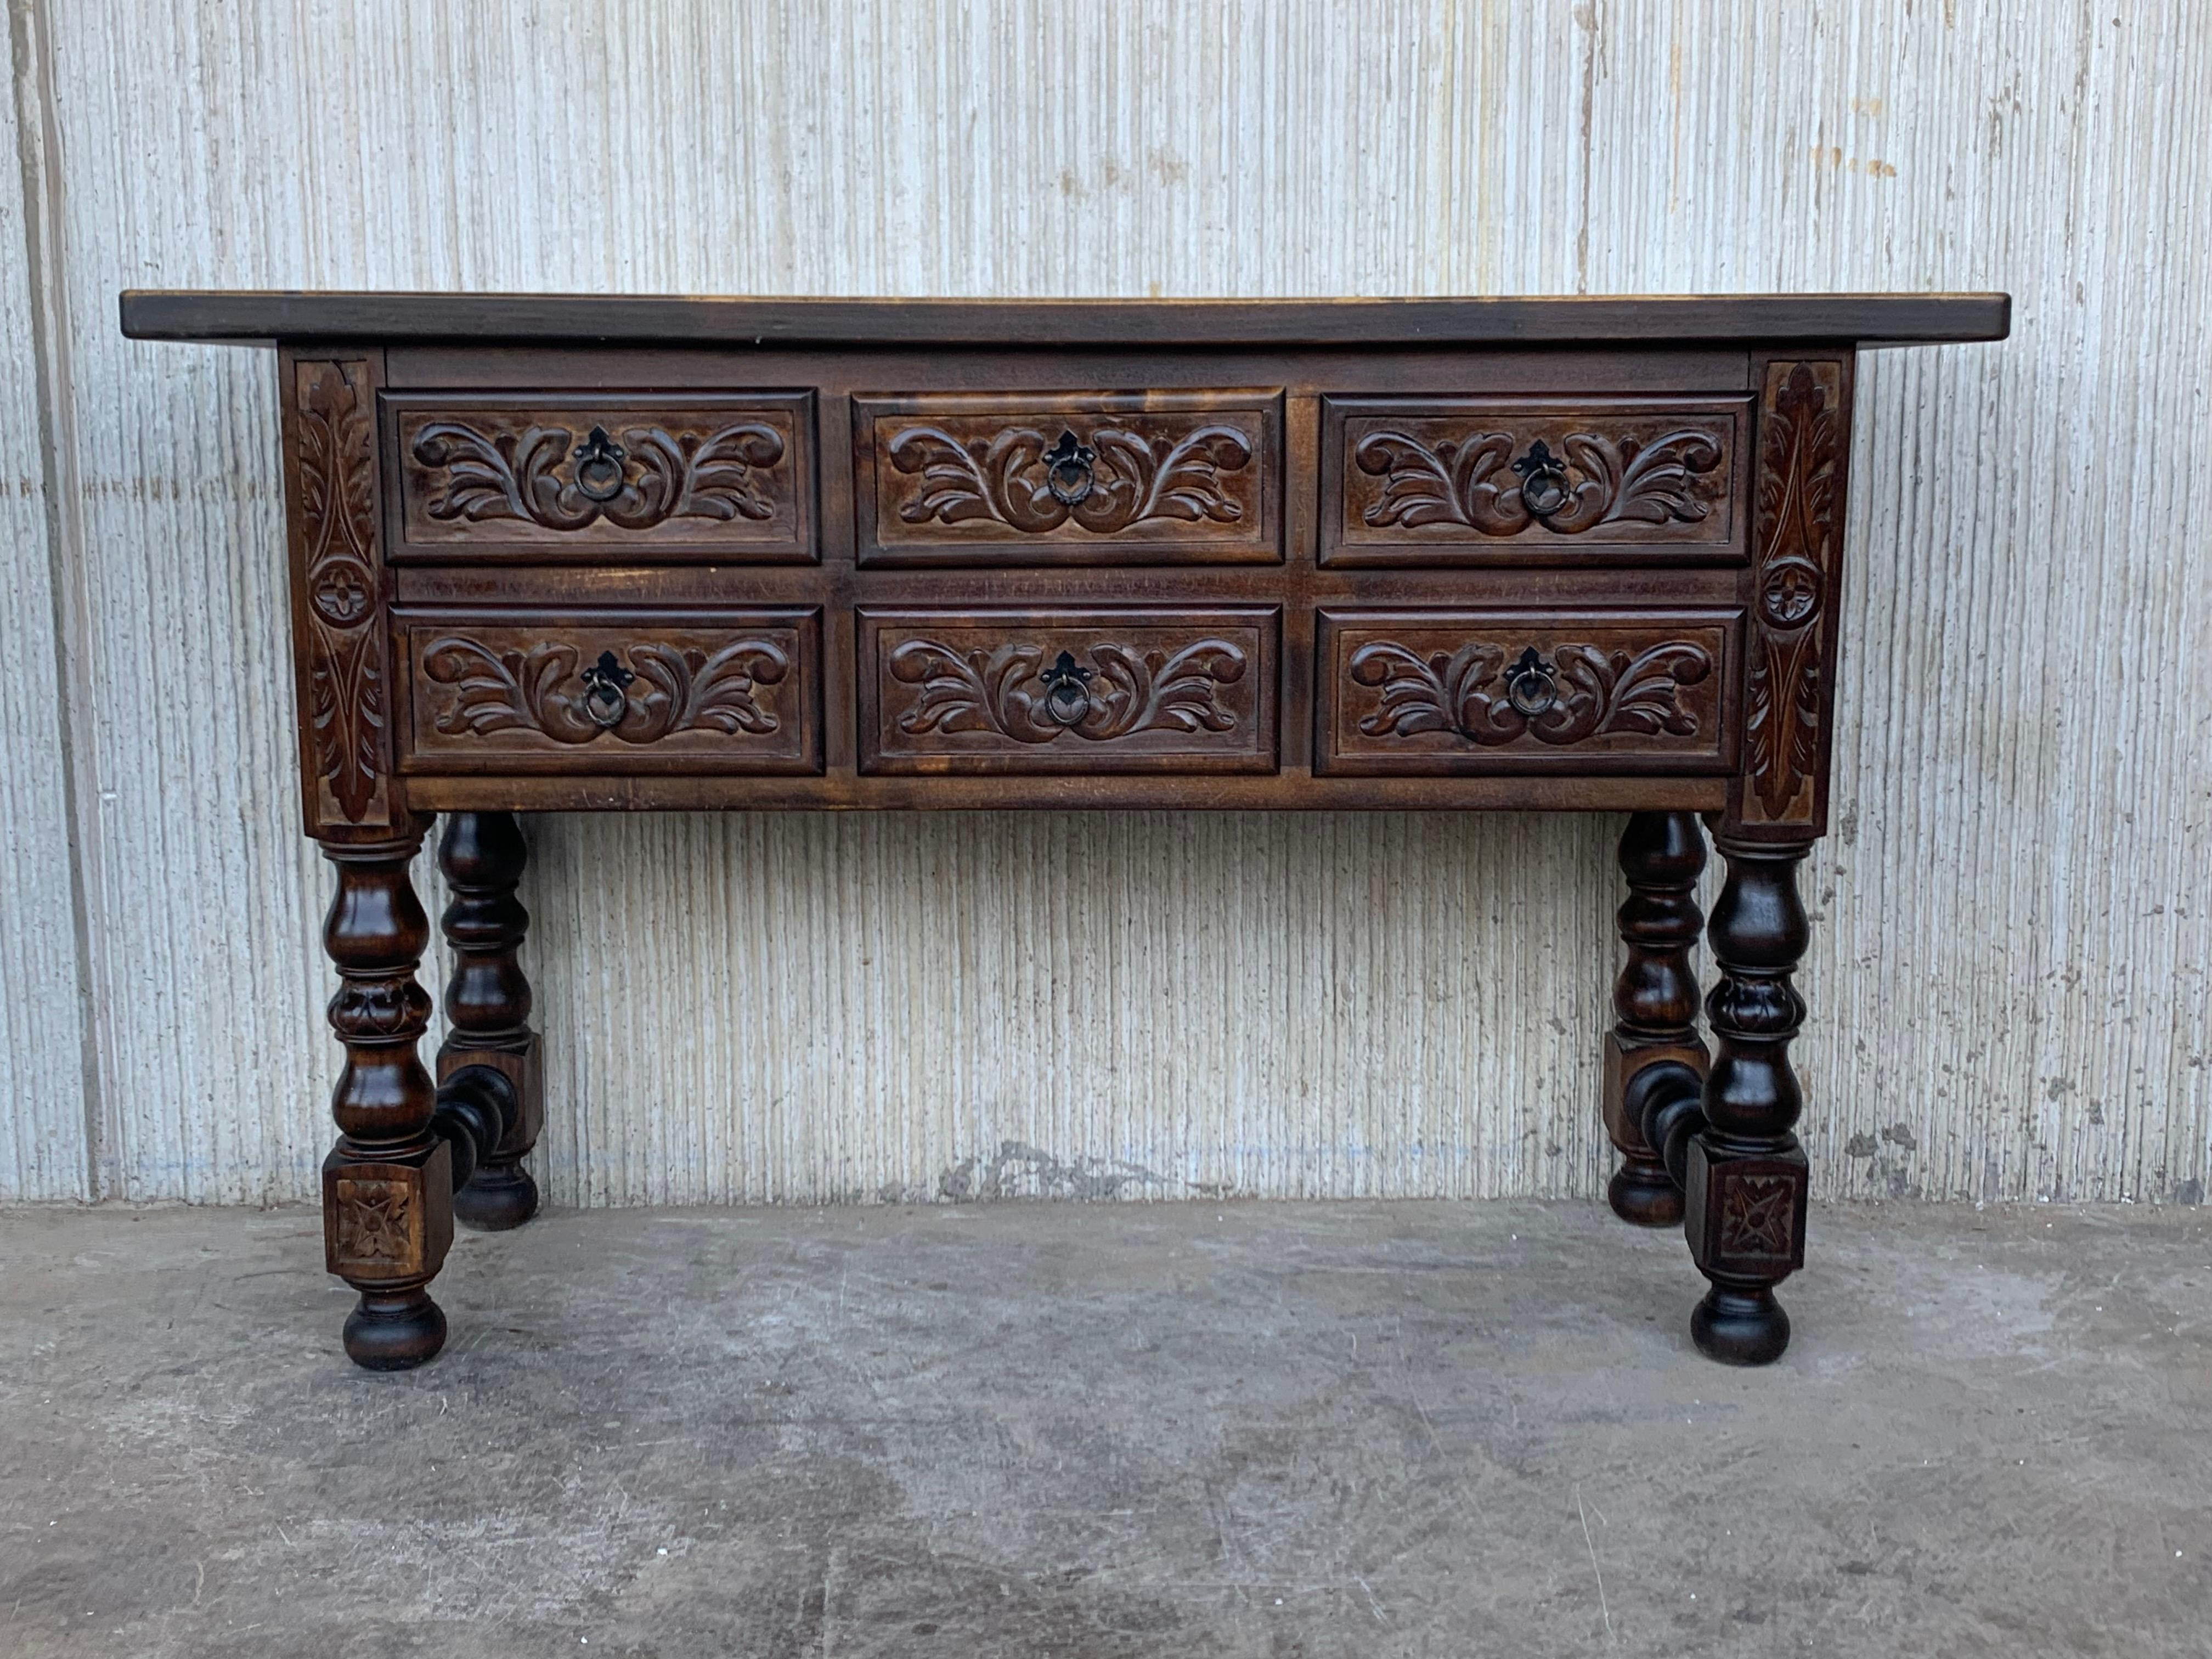 19th century Spanish carved walnut console sofa table with six drawers. You can use like a commode or chest of drawers This elegant antique walnut console was crafted in Spain, circa 1900. The sofa table with four legs features a six carved drawers